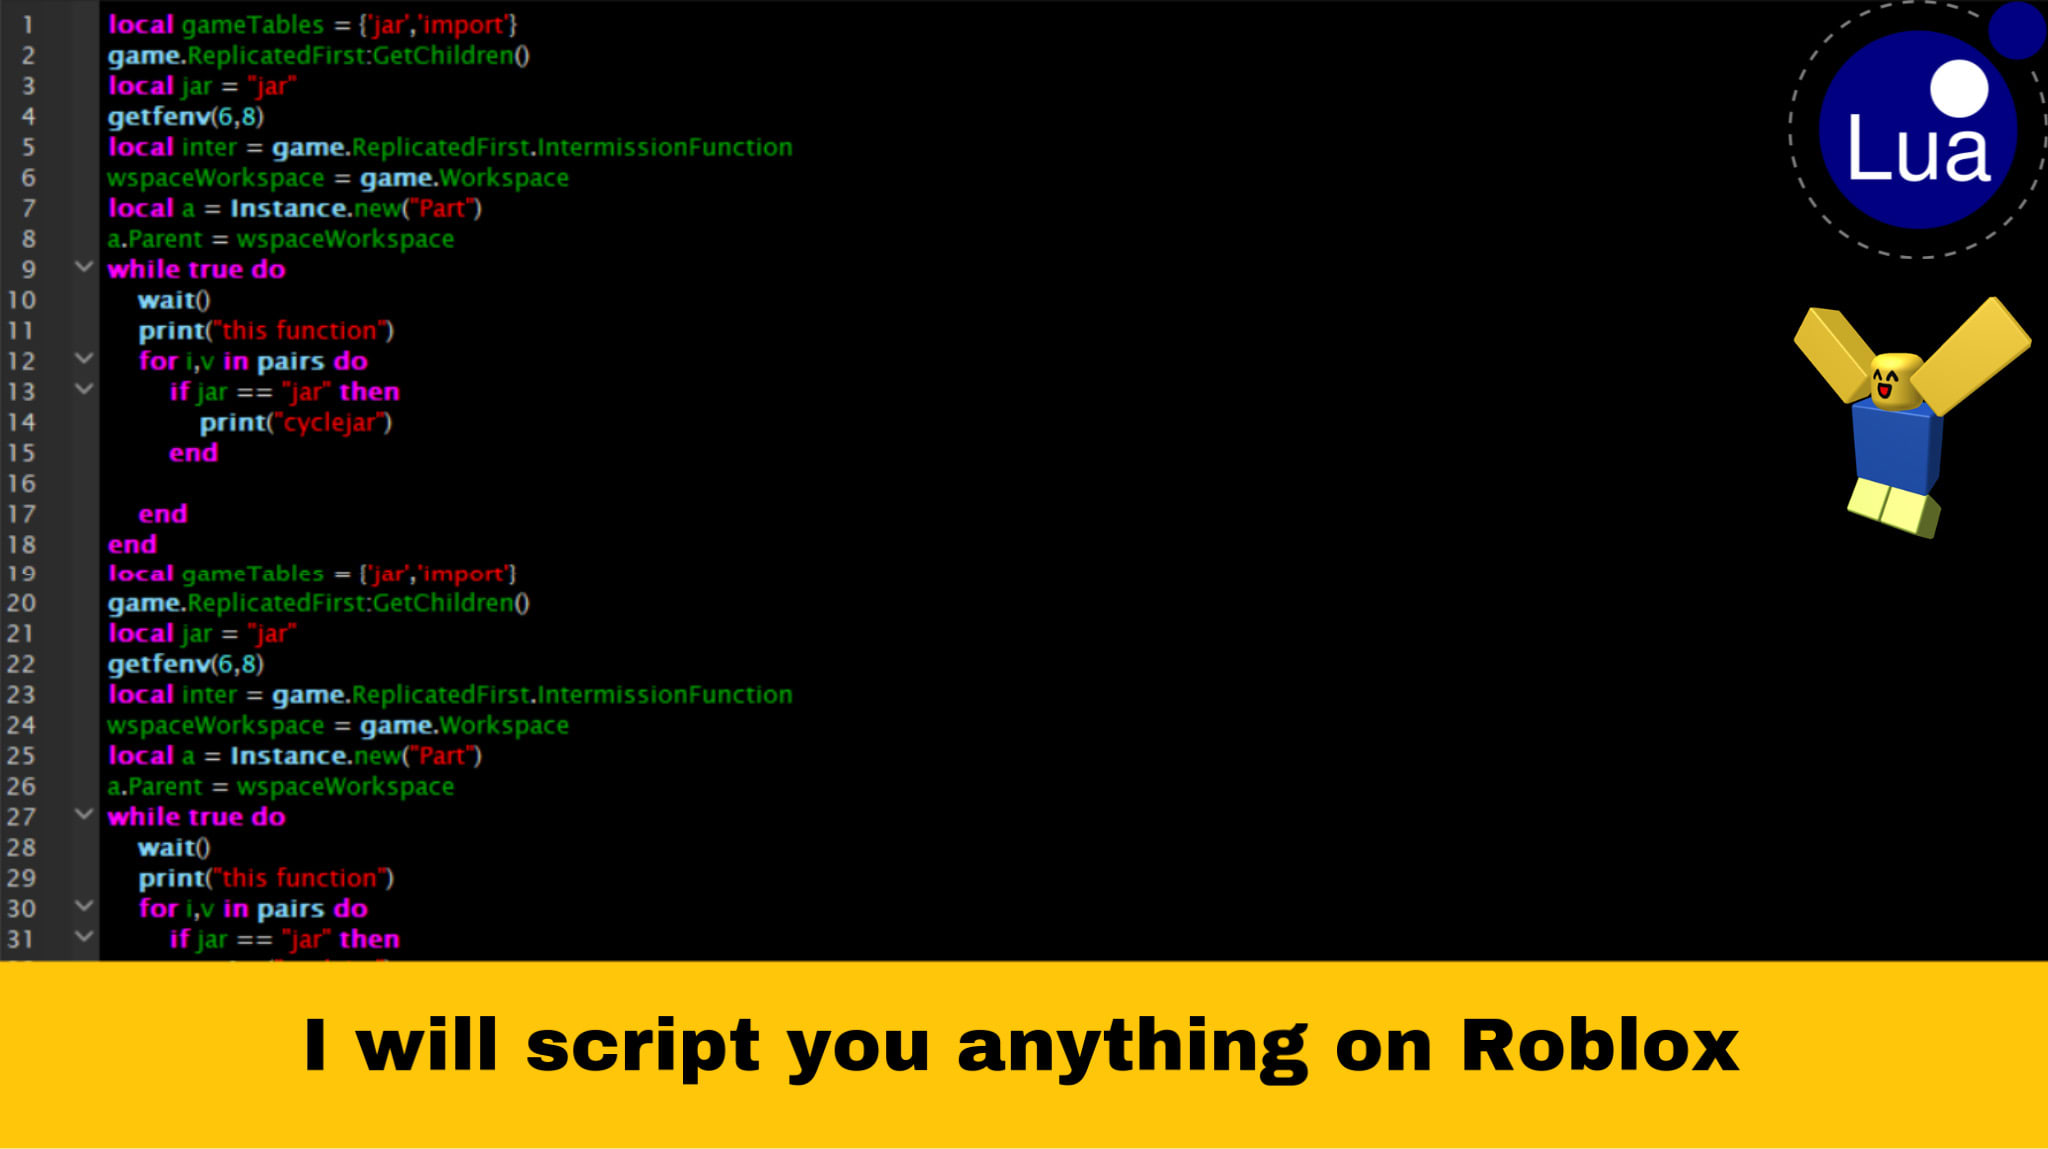 Script You Anything On Roblox By Frepzter - roblox how do you script